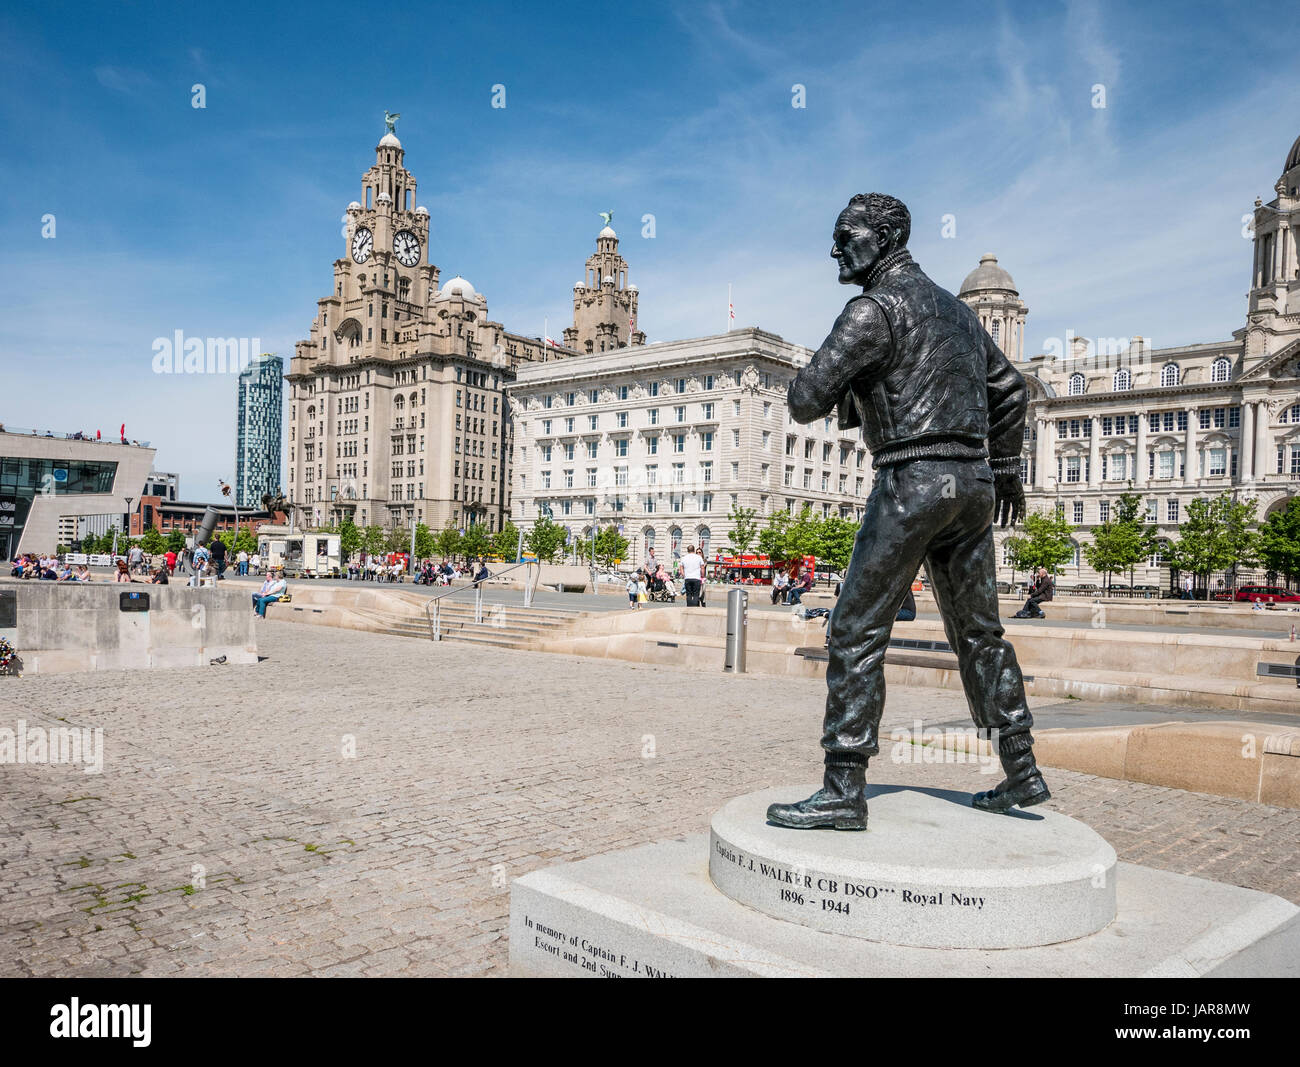 Statue to Captain F.J.Walker CB DSO in front of the Three Graces Buildings Liverpool UK Stock Photo